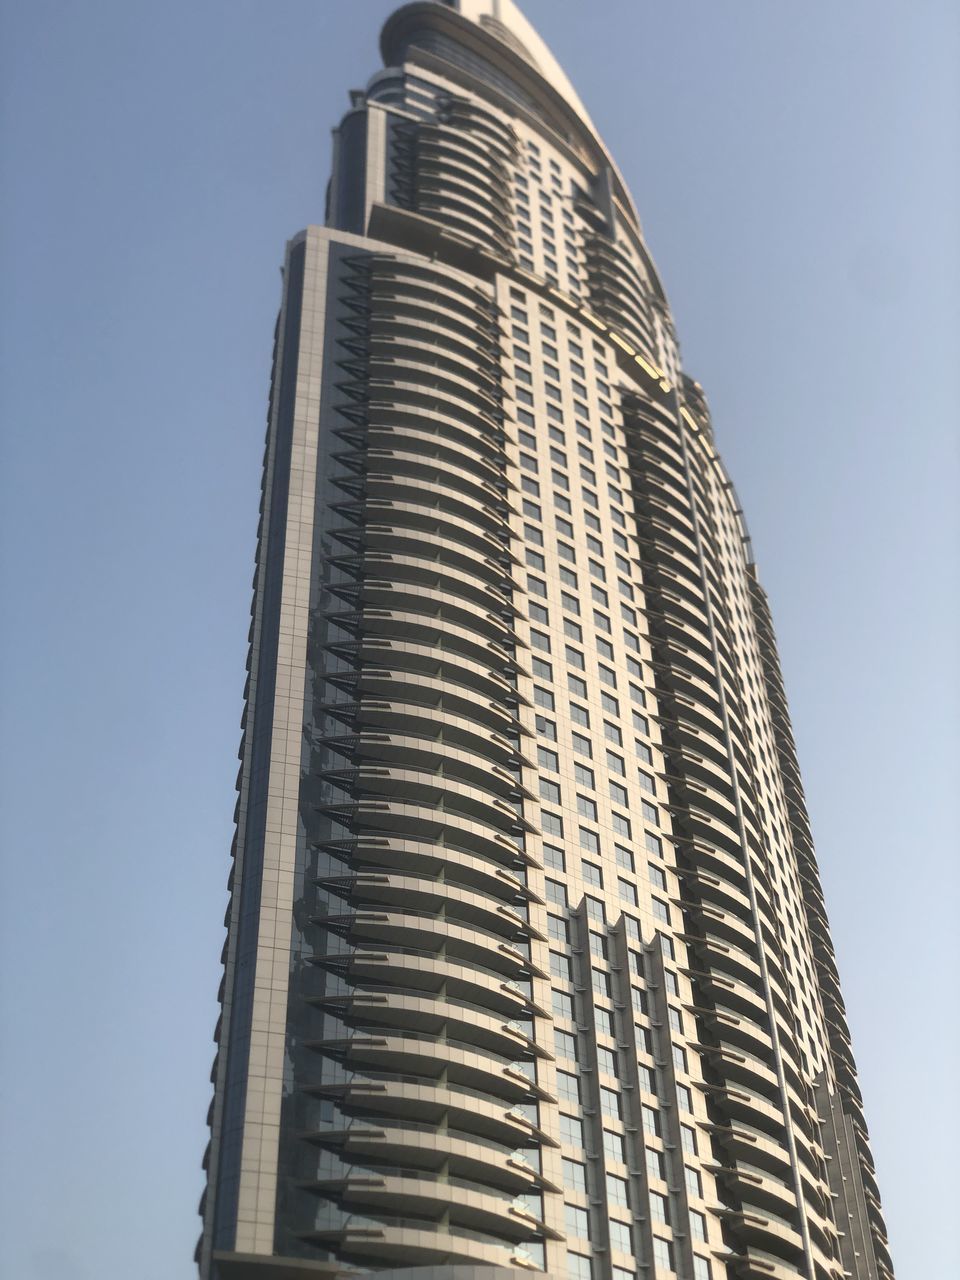 LOW ANGLE VIEW OF BUILDING AGAINST CLEAR SKY